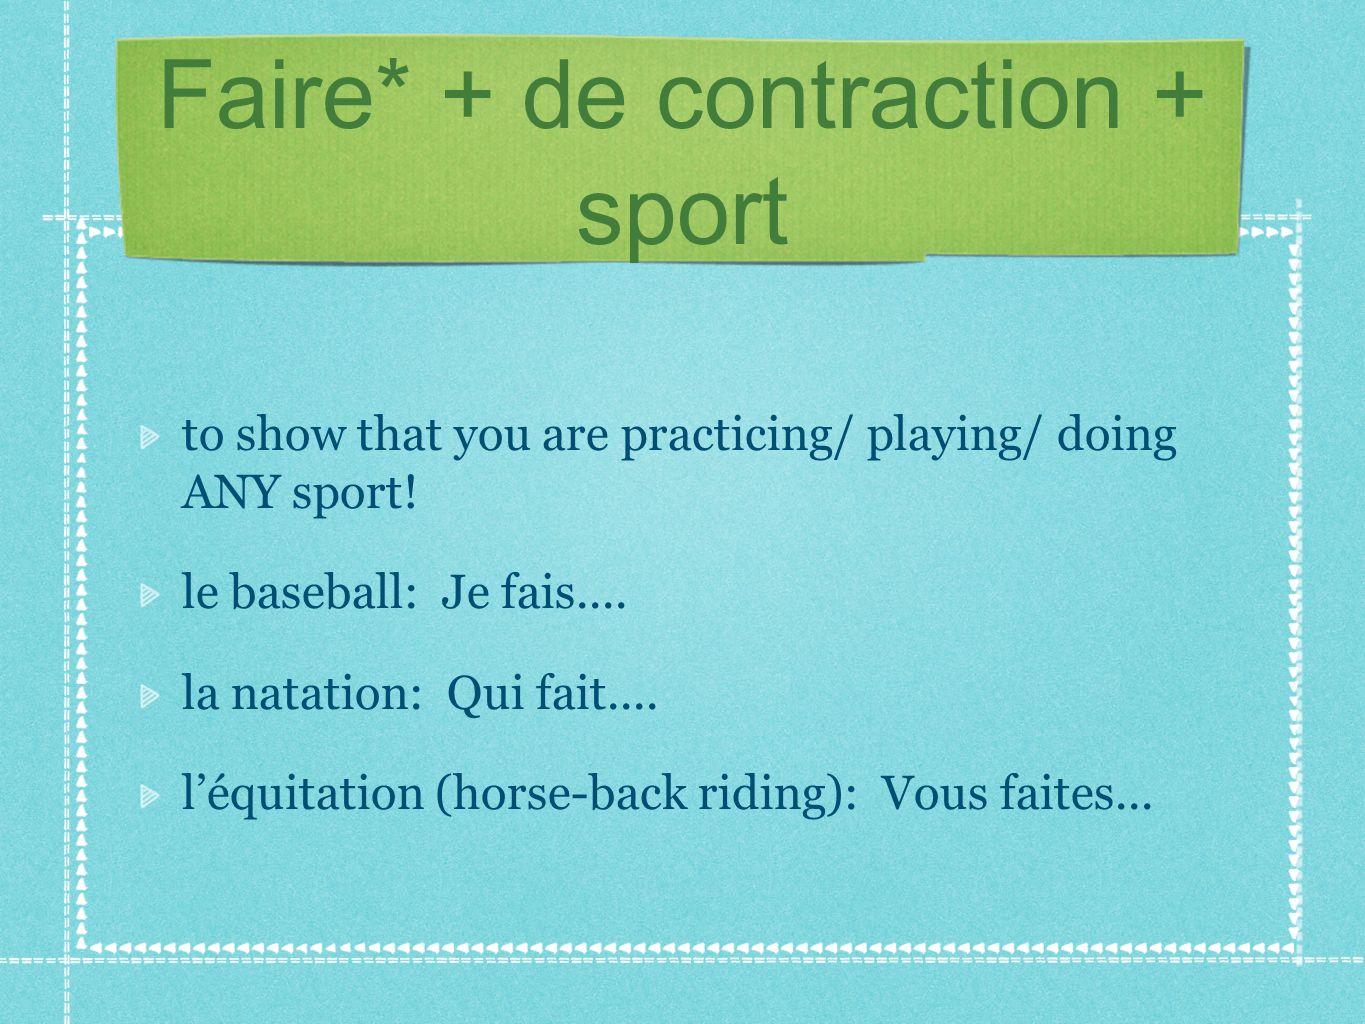 Faire* + de contraction + sport to show that you are practicing/ playing/ doing ANY sport.